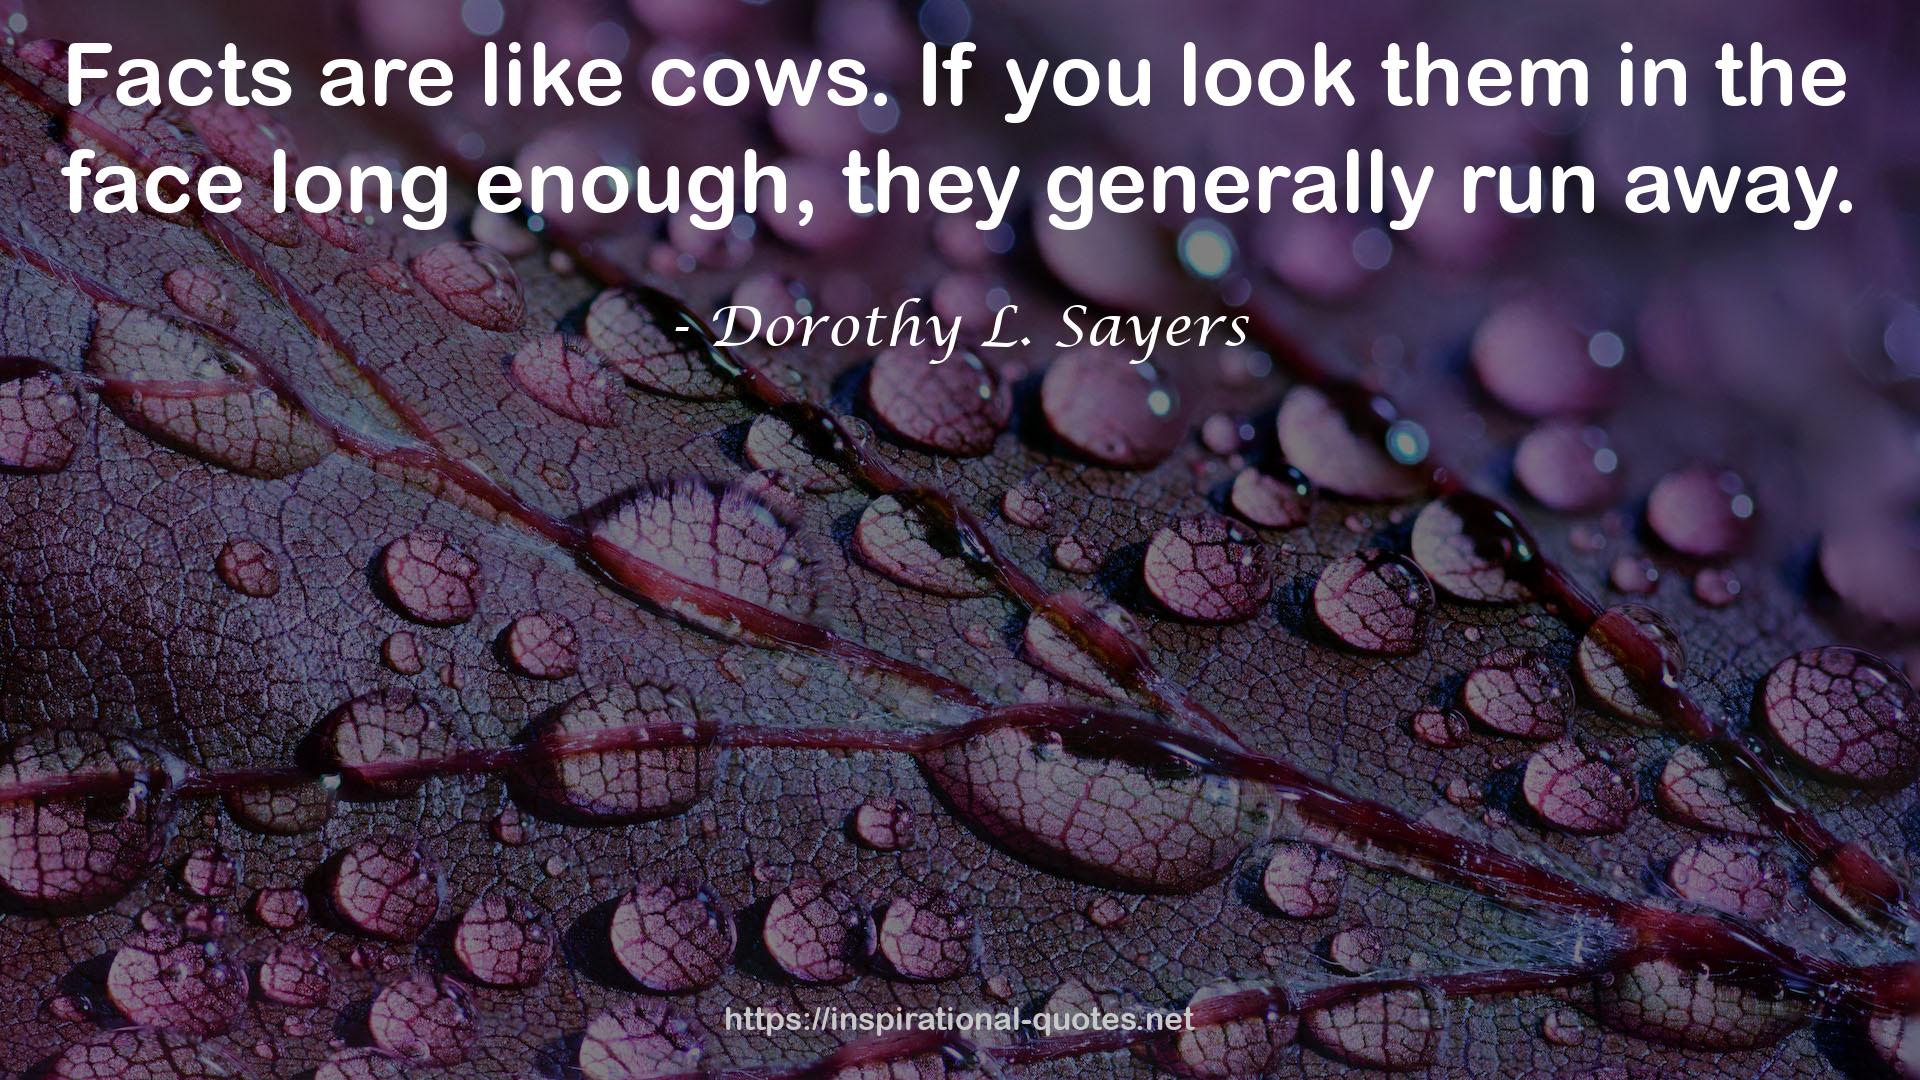 Dorothy L. Sayers QUOTES